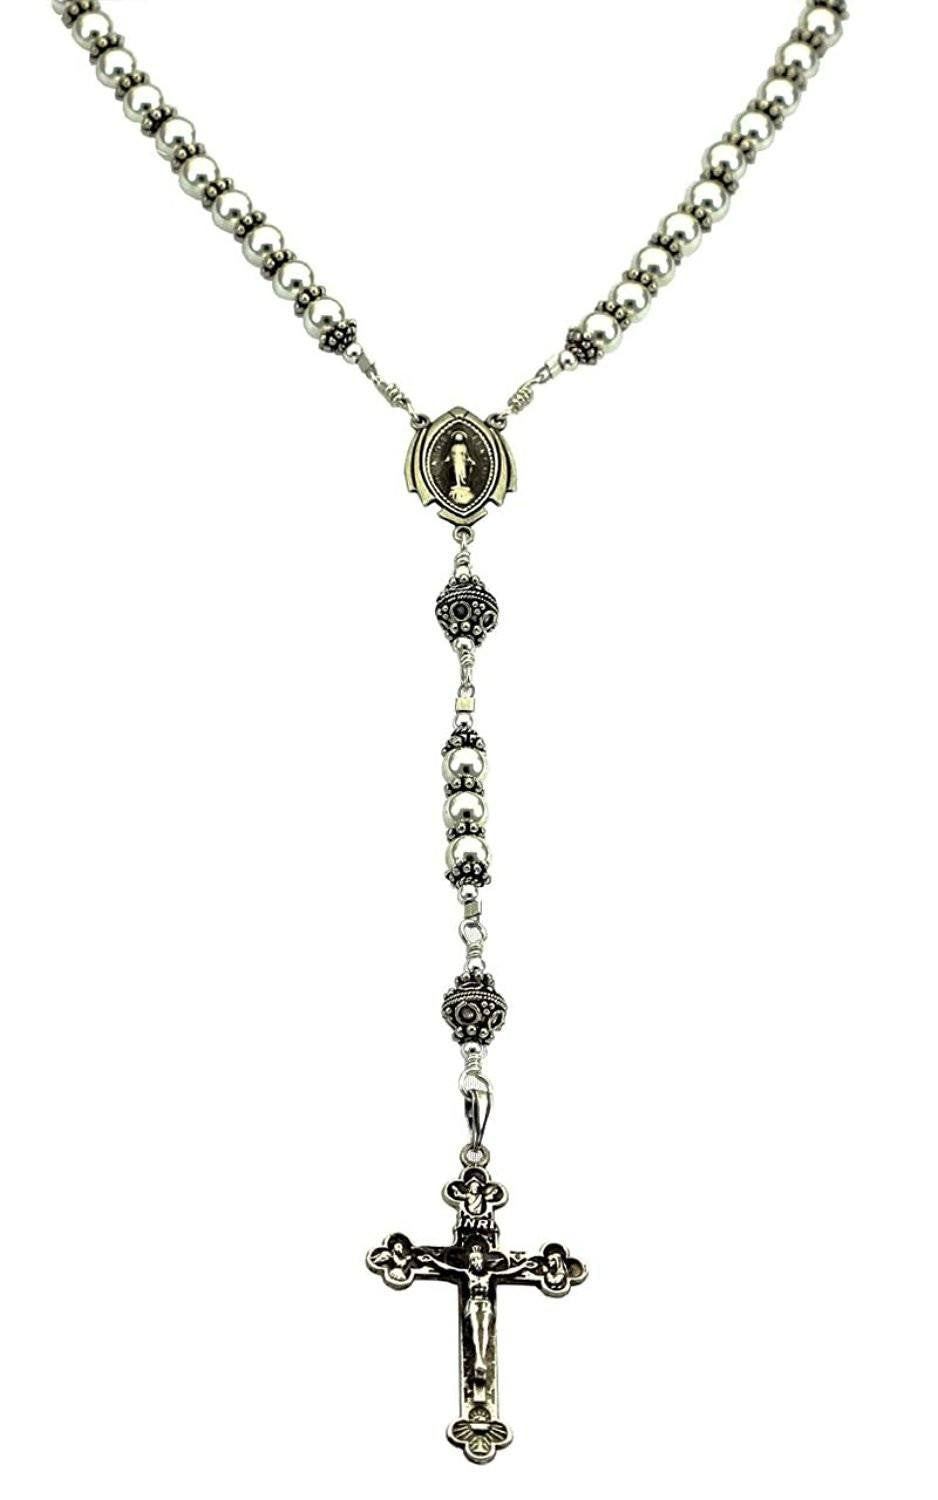 Nazareth Store White Zircon Clear Crystals Beads Rosary Necklace Miraculous  Medal & Crucifix : Clothing, Shoes & Jewelry - Amazon.com